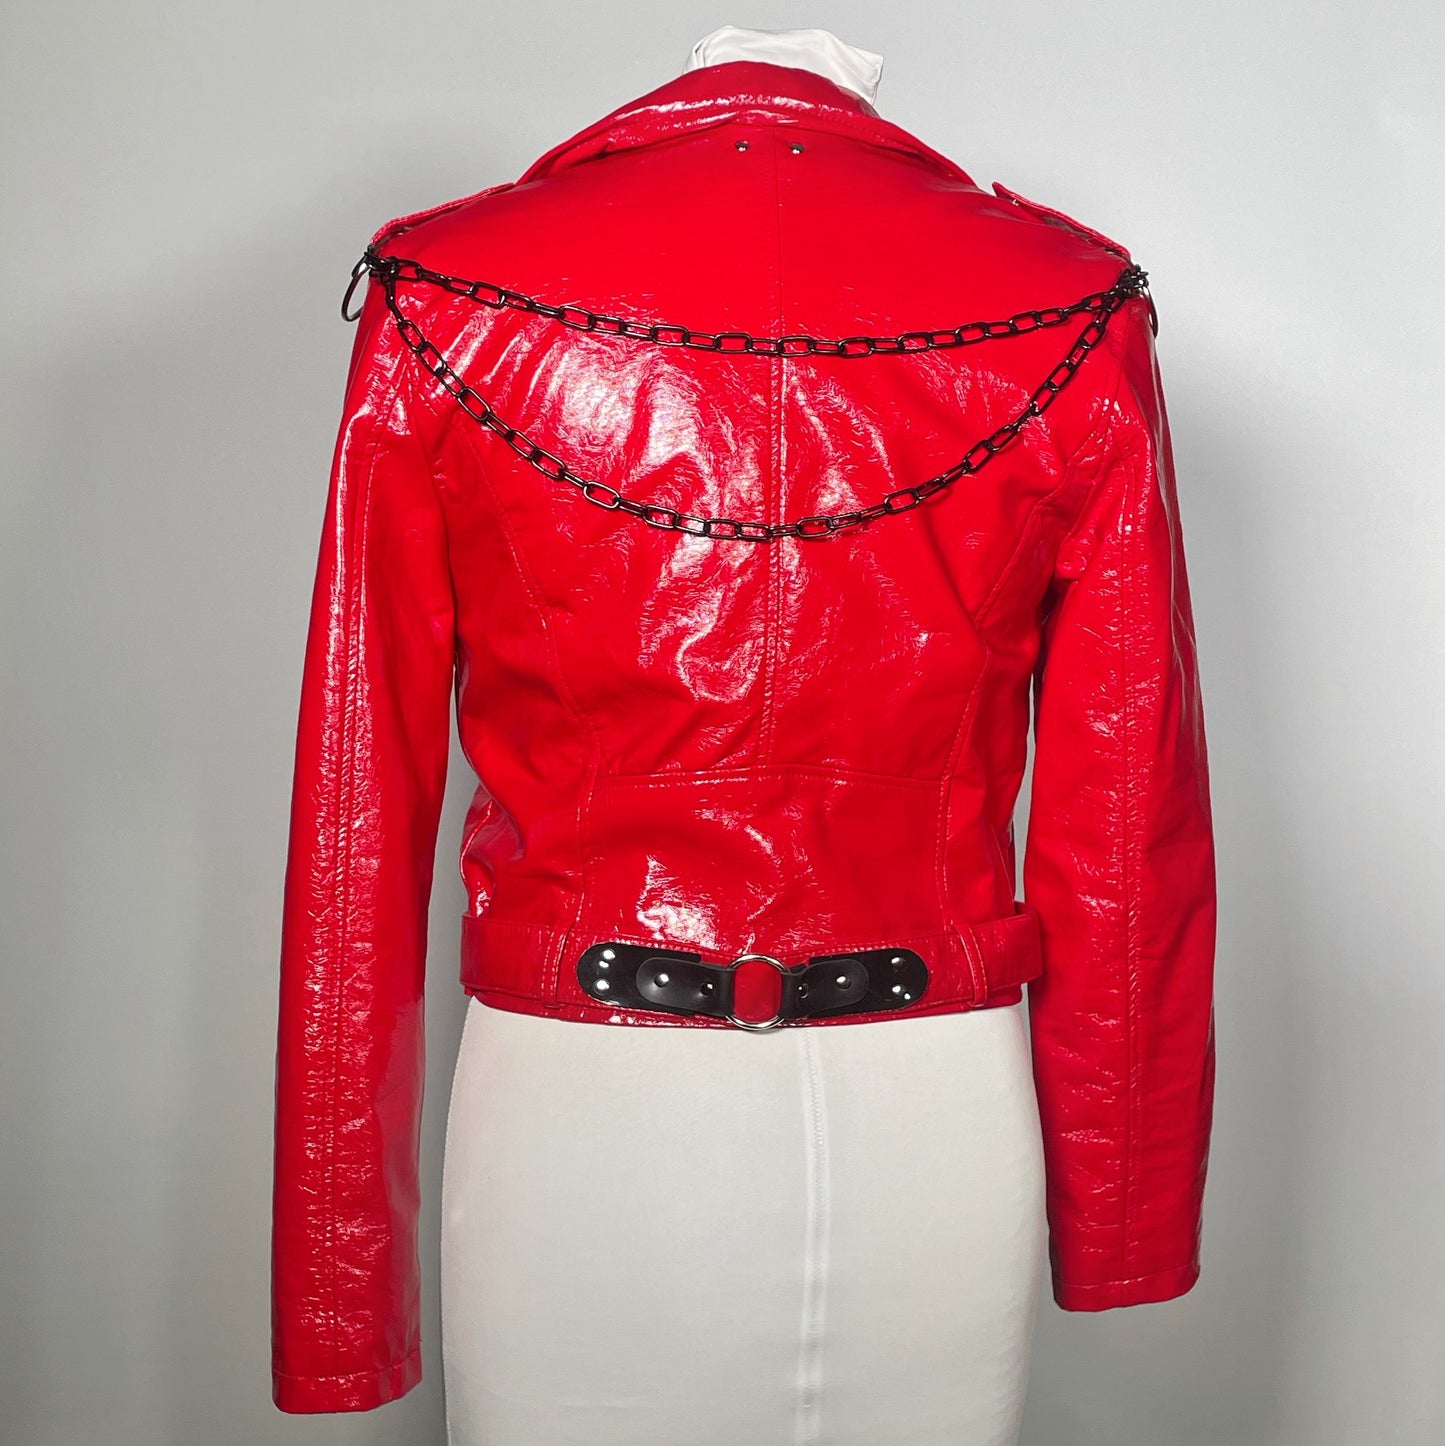 Red PVC Vinyl Goth Moto Jacket with Black PVC Cross, Collar and Black Chains